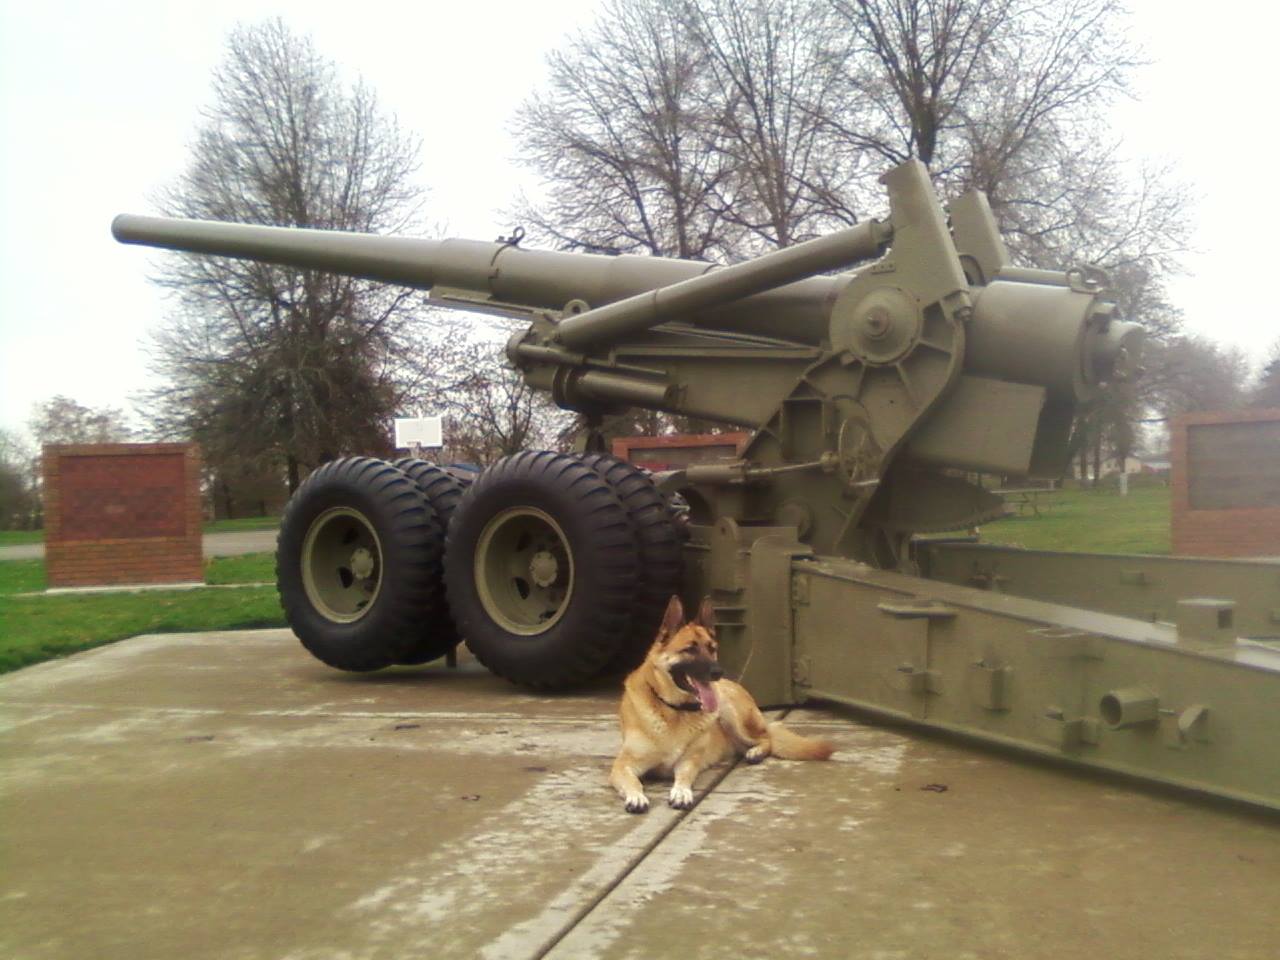 photo at Linn County Veterans Memorial with dog in front of howitzer